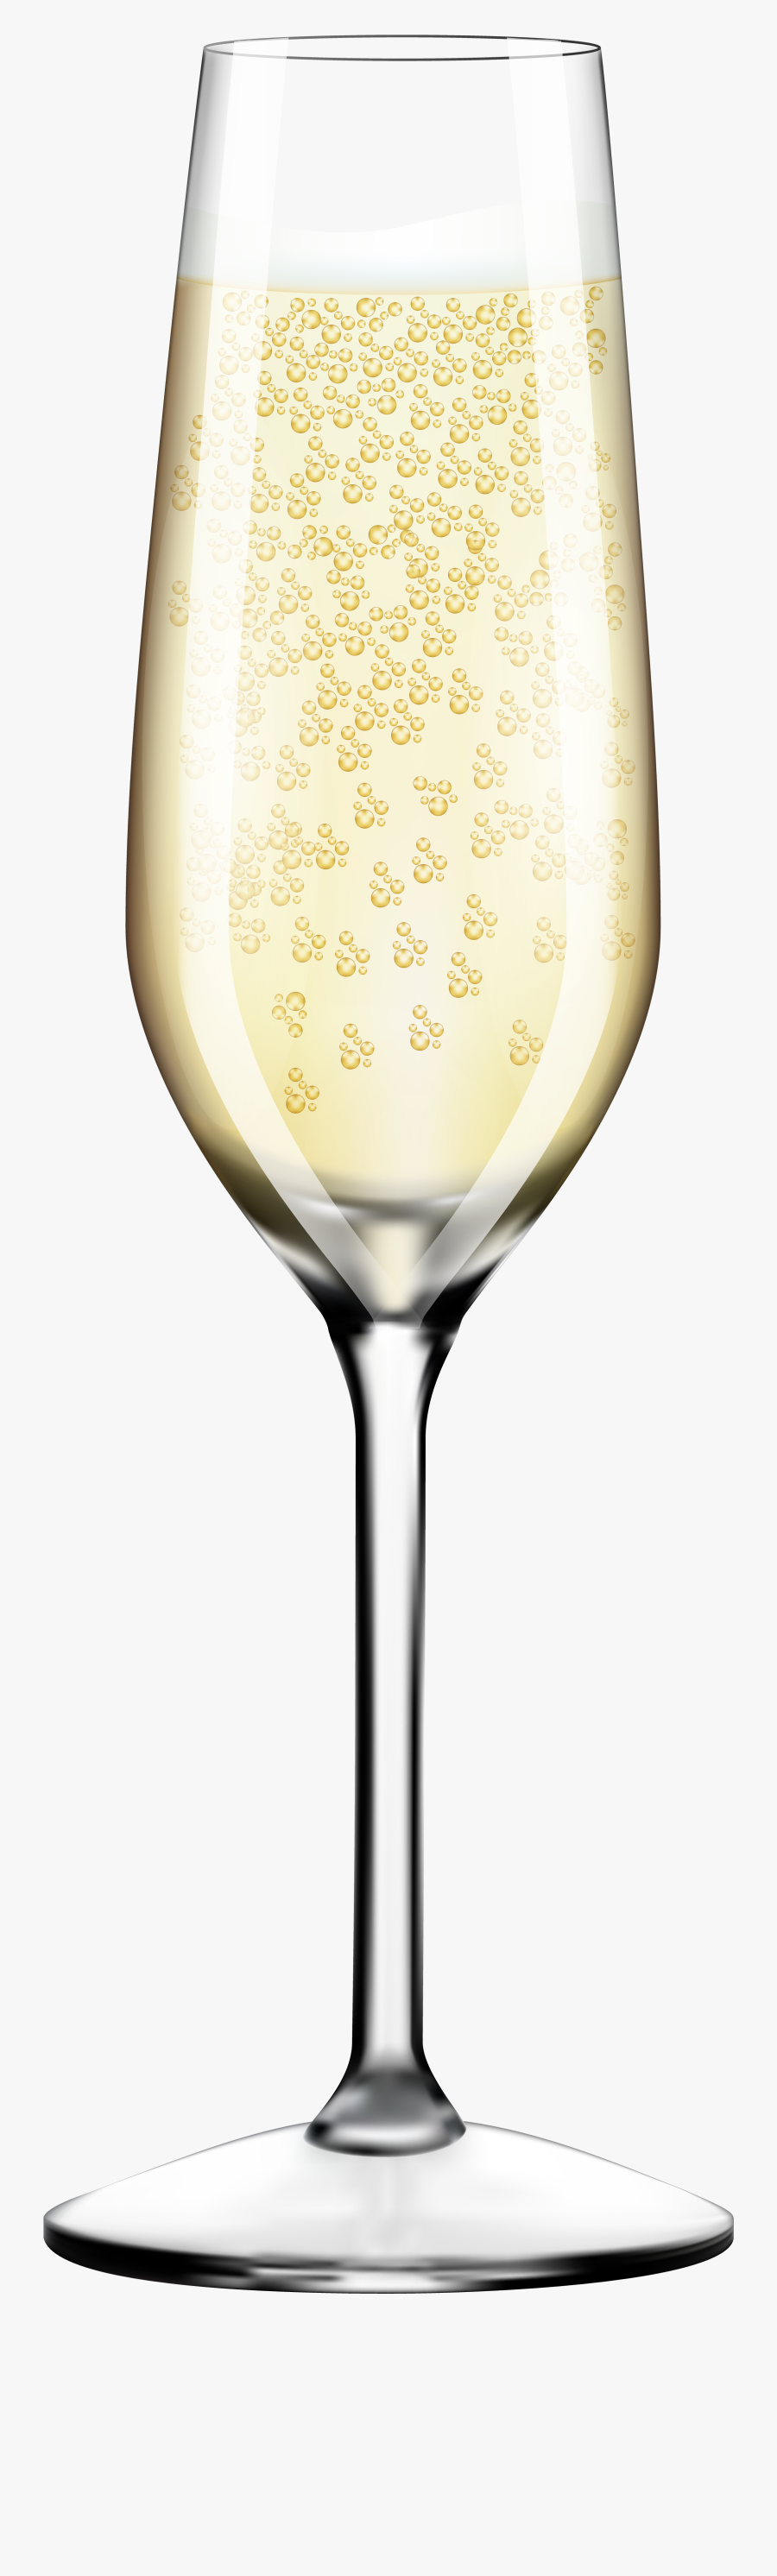 Champagne Glass Png Clip Art Image - Glass Of Champagne Png Transparent Background, Transparent Clipart